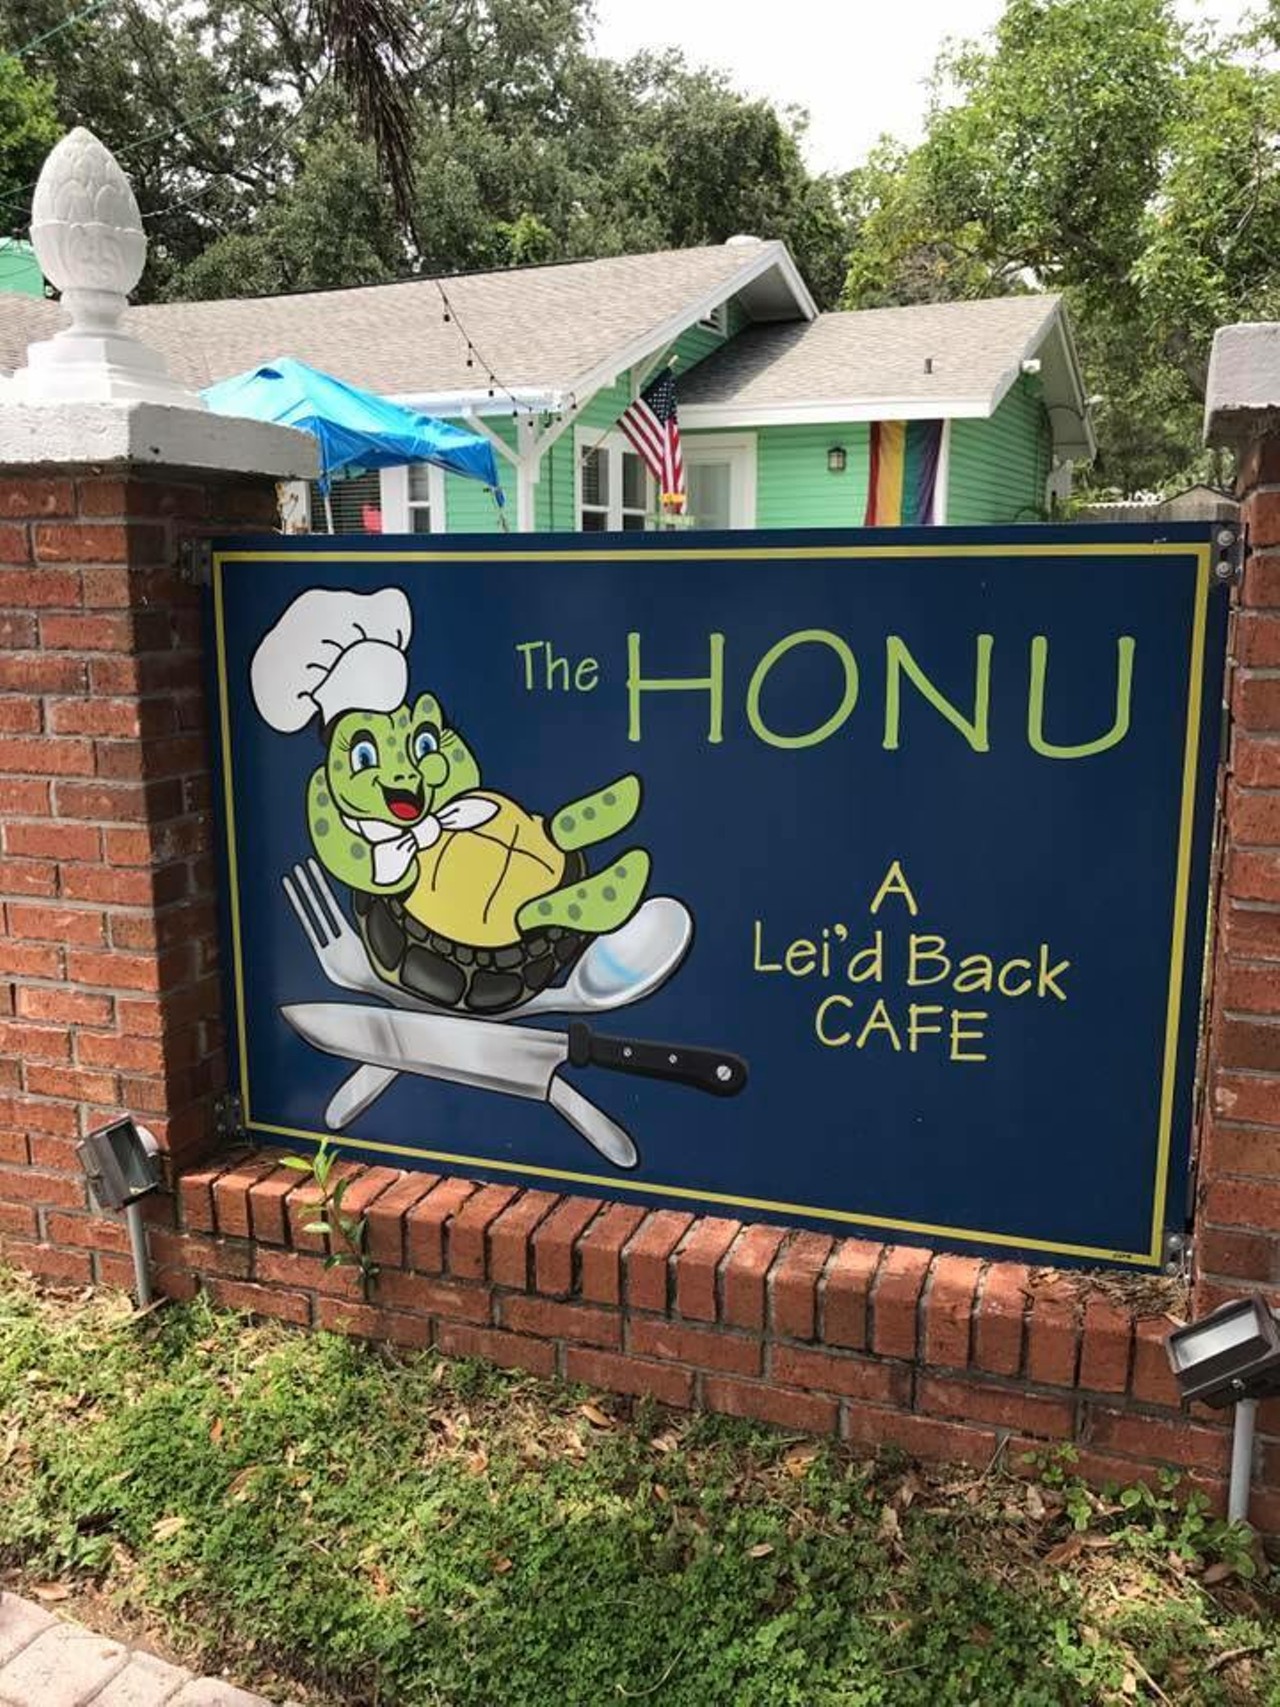  The Honu
516 Grant St, Dunedin, FL 34698,  (727) 333-7777  
&#147;A lei&#146;d back cafe,&#148; The Honu serves up a menu that&#146;s traditional, island flavors meets fresh, local ingredients of the area. Their poke bowl is a local favorite, so make it sure to snag one when you swing by. Have some dietary restrictions? The Honu is down to switch up any dish to vegan or vegetarian if you just ask! 
Photo via  The Honu/Facebook